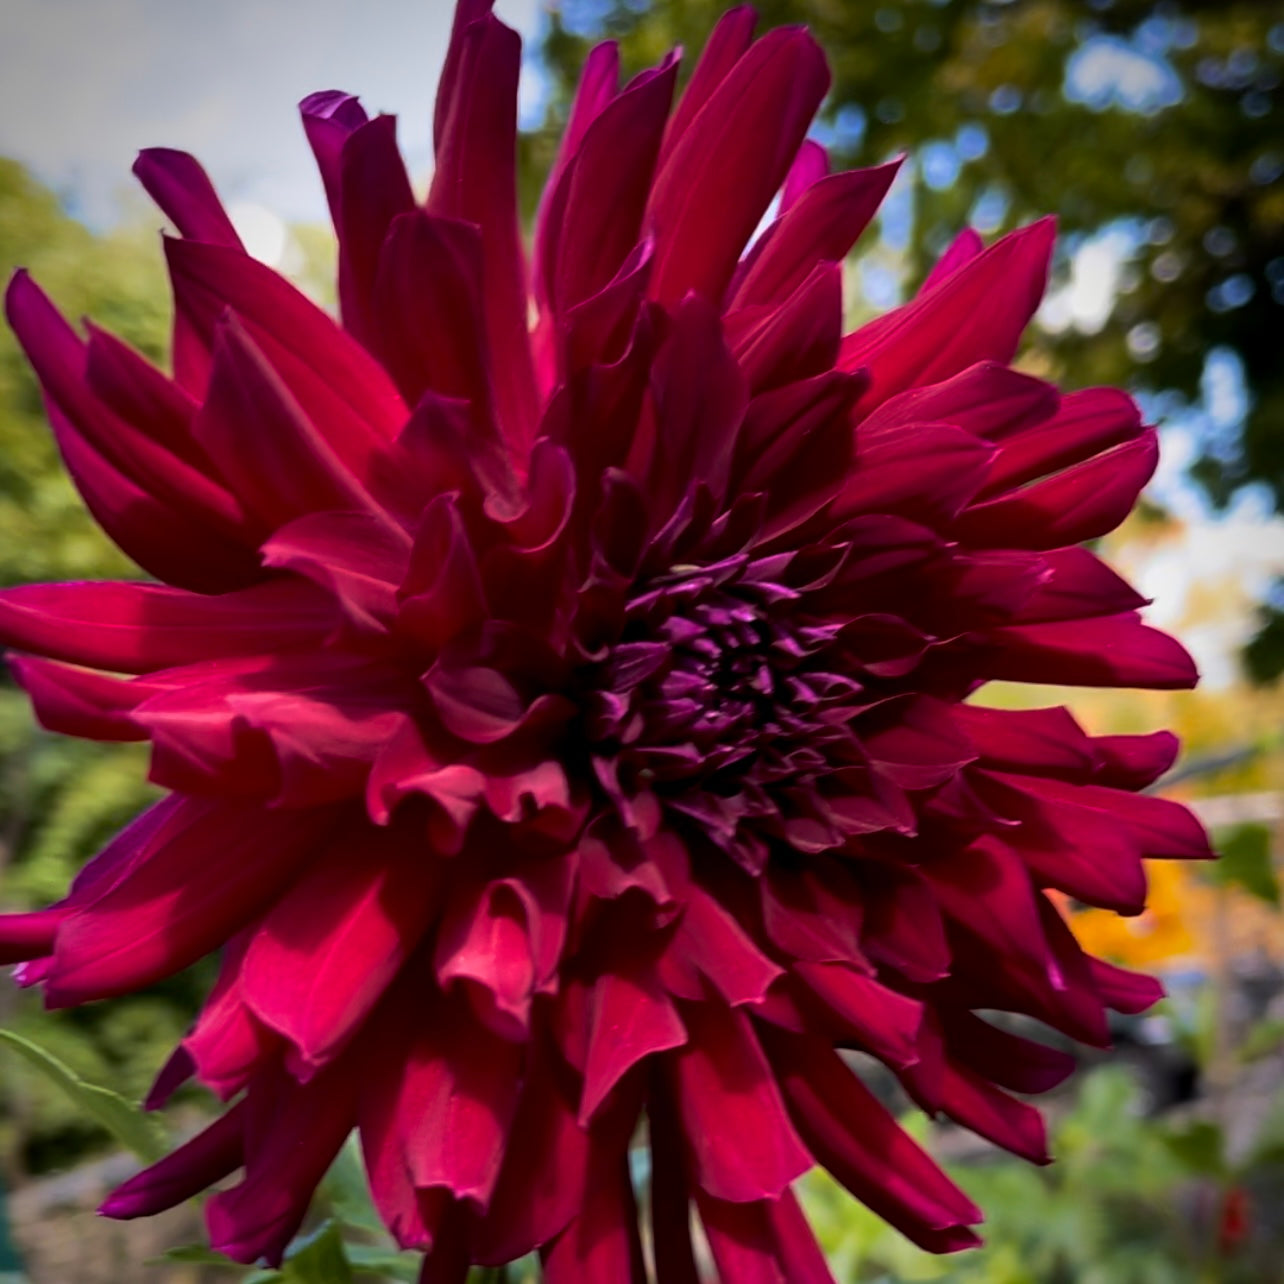 Unapologetically gorgeous black raspberry dinnerplate dahlia with contrasting neon purple undersides, Brigitta Alida is a very glamorous diva. The petals that lightly curl at the tips definitely add texture and festive presence in the garden. 8" blooms on sturdy 4' tall plants look rich, velvety and are sure to steal the show! Buy dahlia tubers online www.lilysgardenstore.com